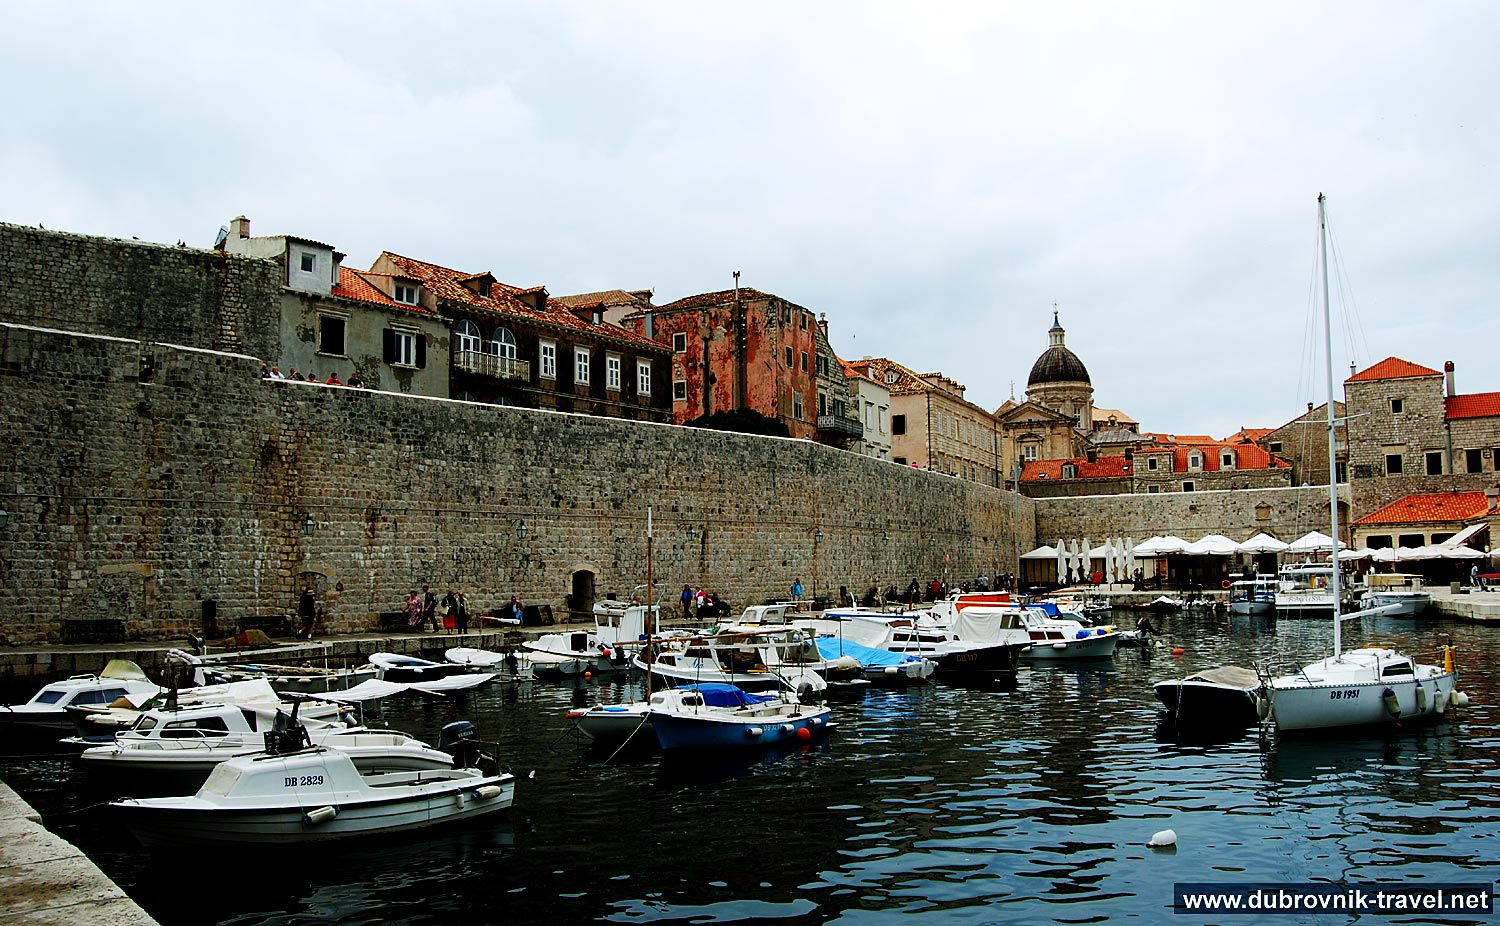 Small boats in the Old Port of Dubrovnik